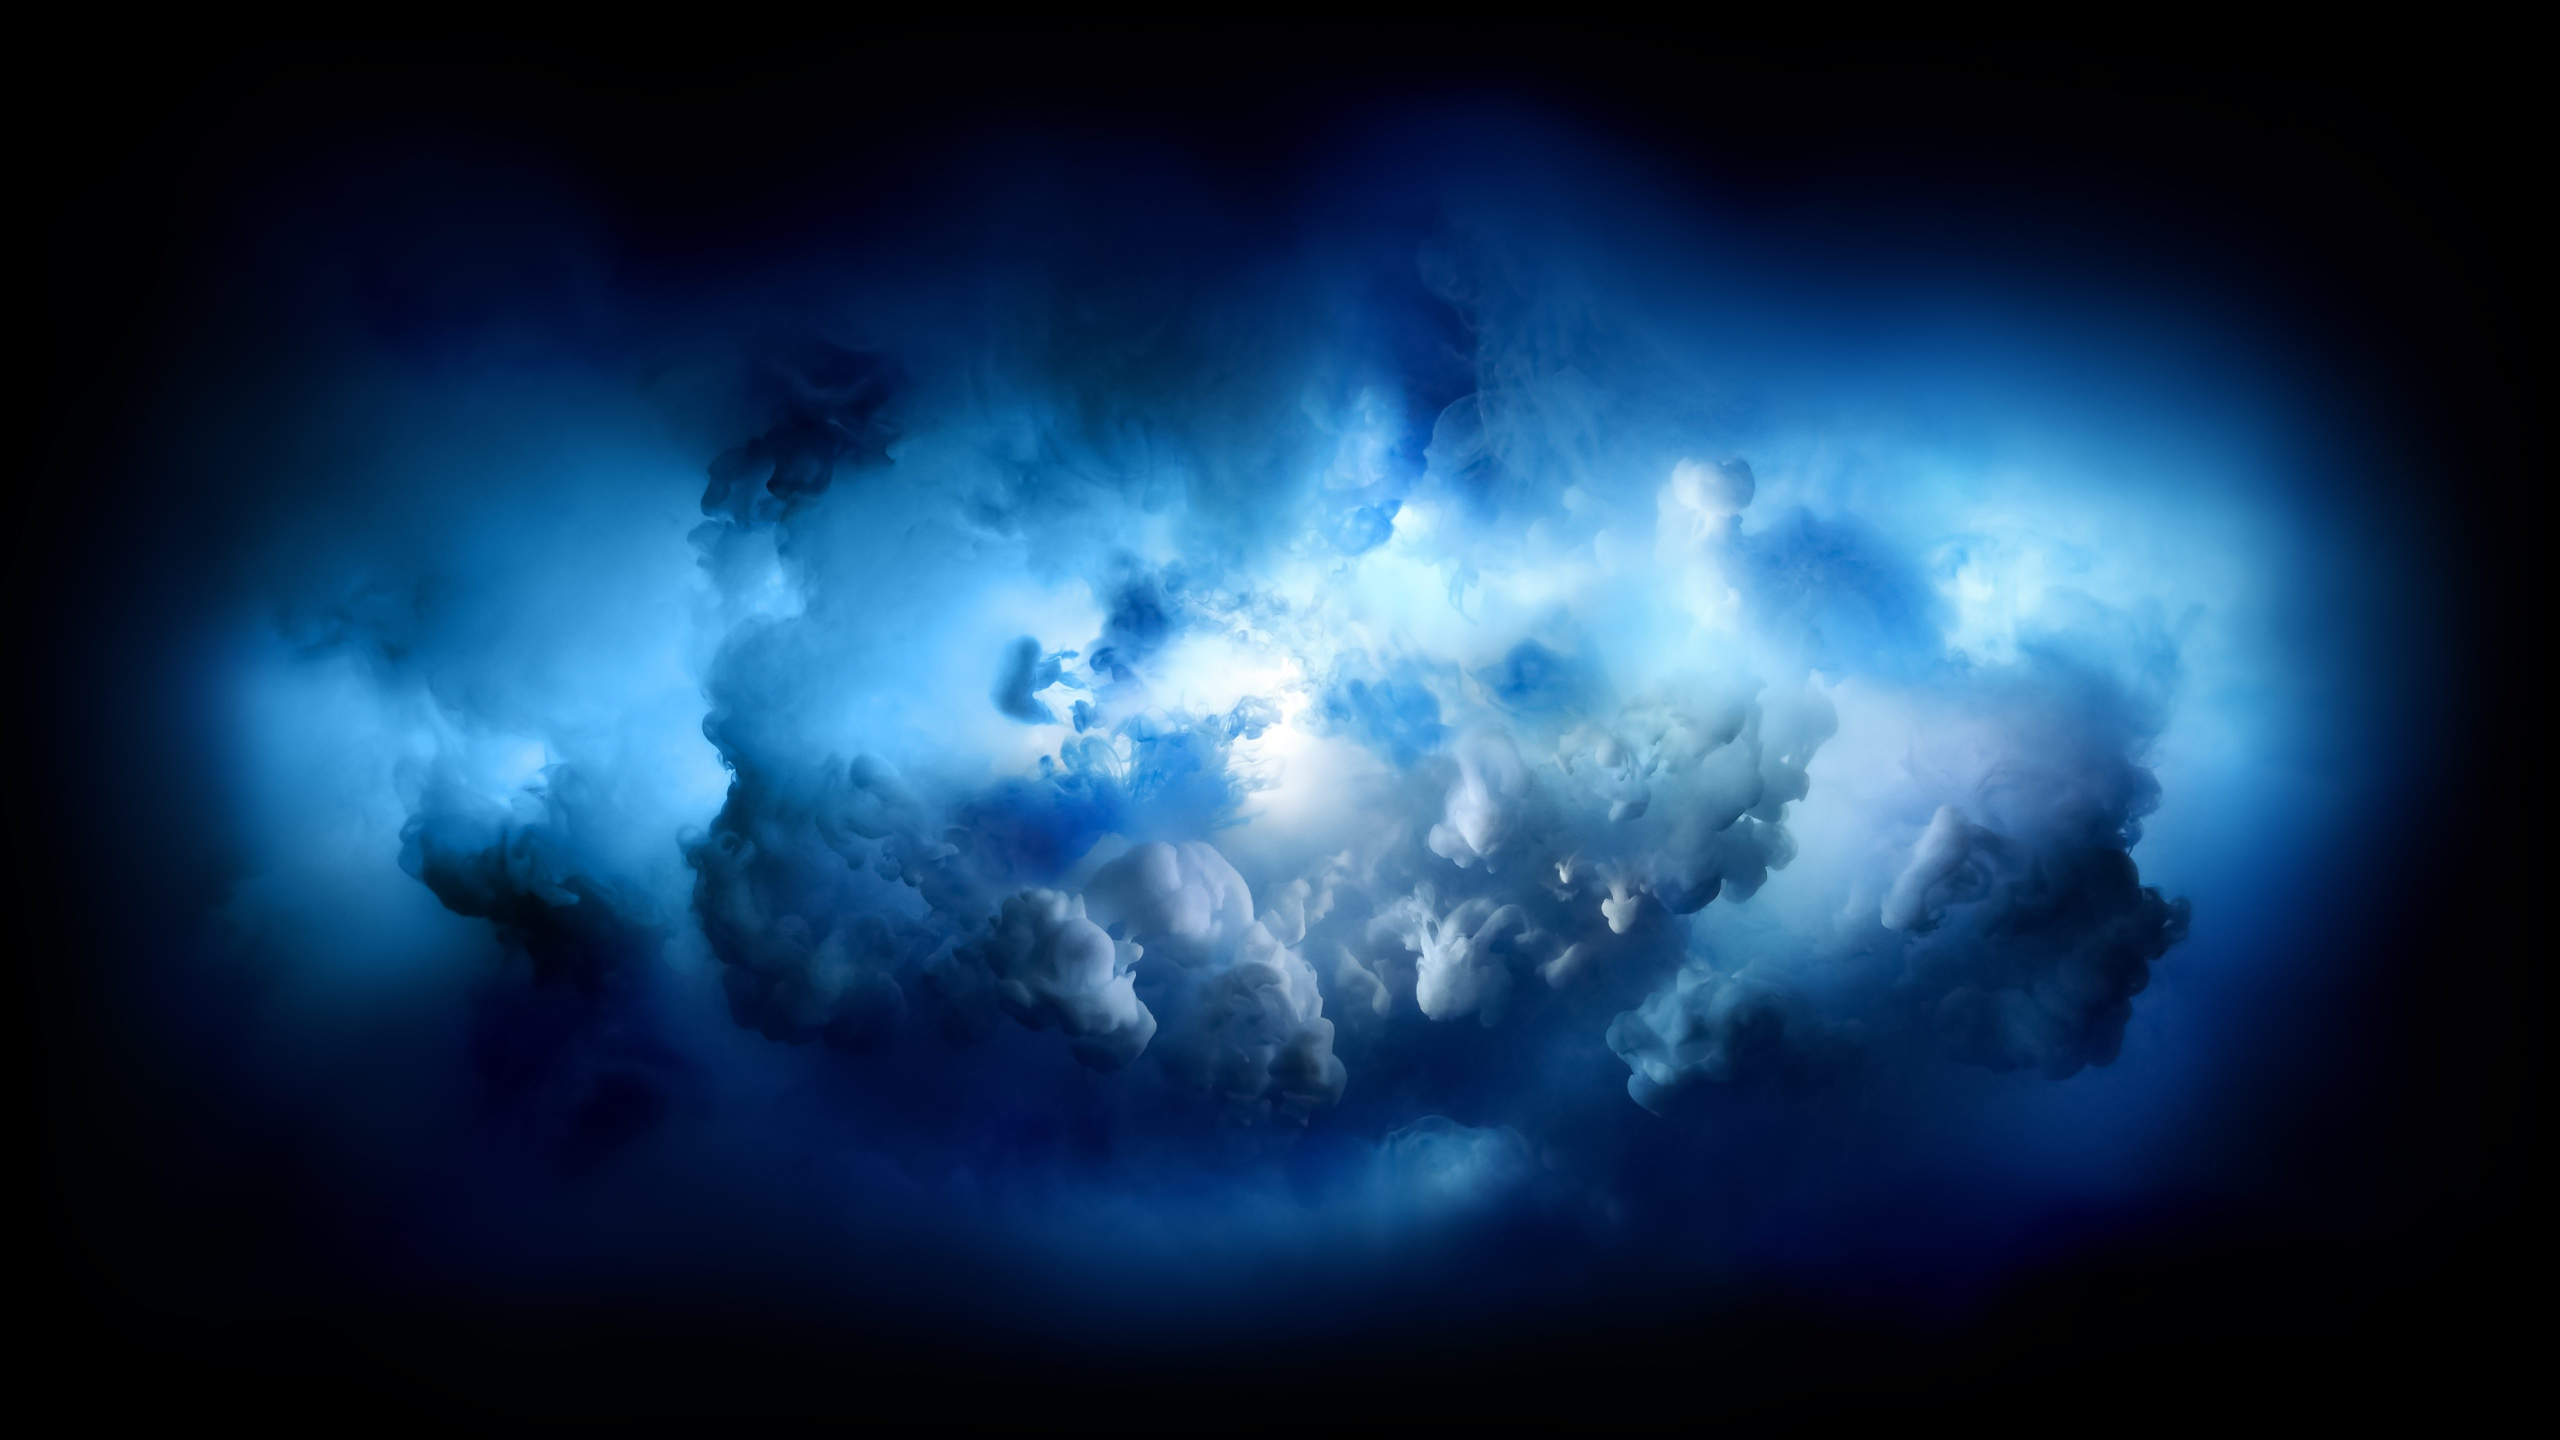 download 2560x1440 wallpaper dark blue and white clouds dual wide widescreen 16 9 widescreen 2560x1440 hd image background 2043 download 2560x1440 wallpaper dark blue